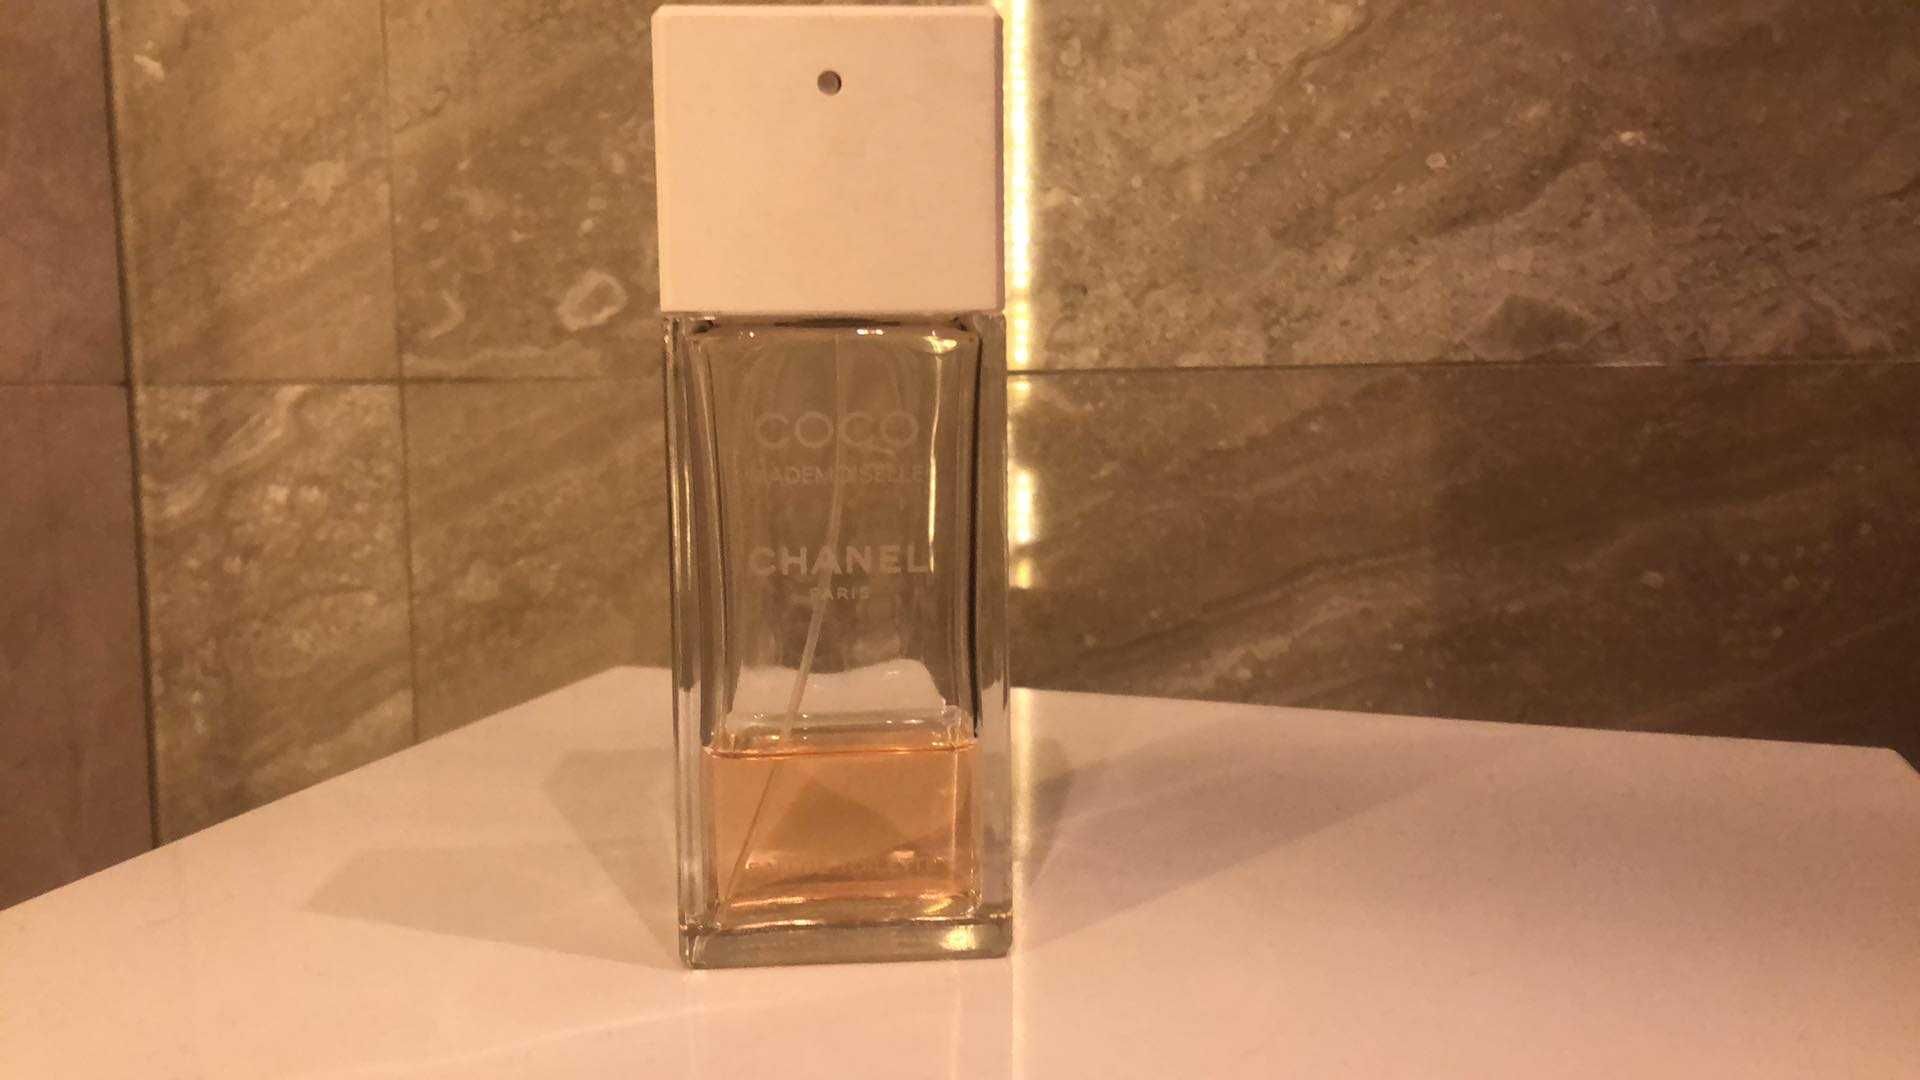 Chanel Coco Mademoiselle edt